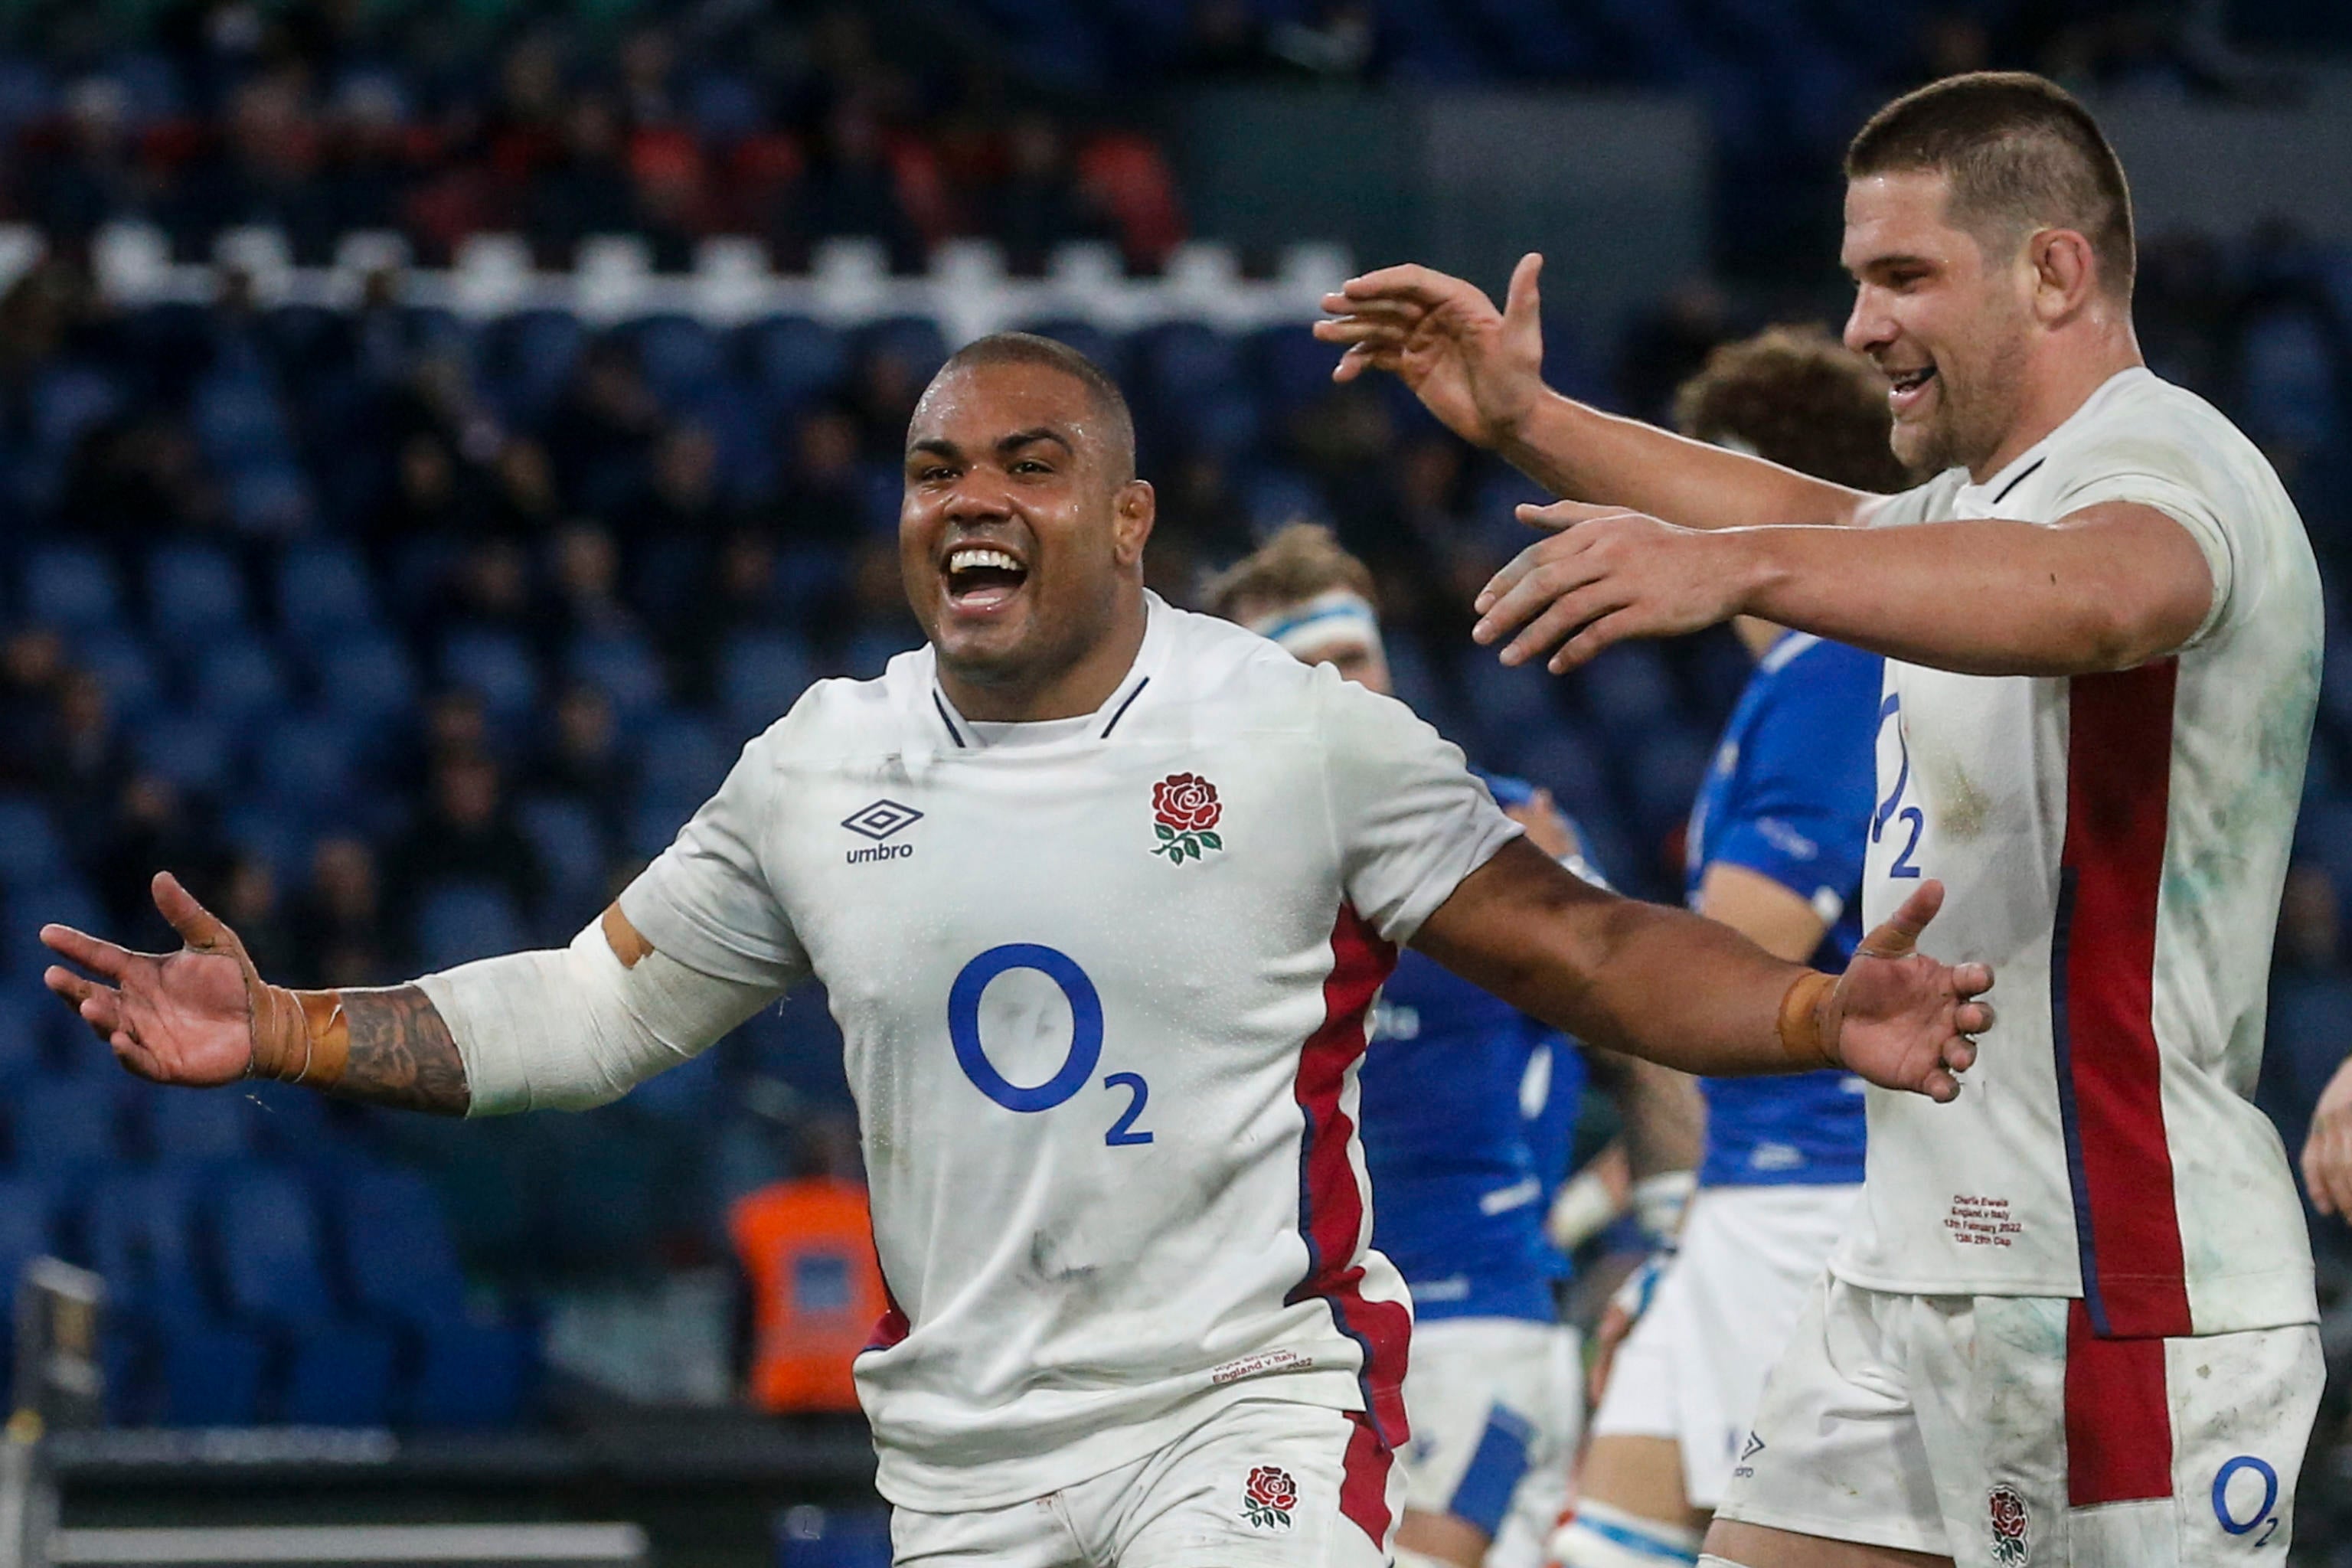 Kyle Sinckler will be key for England against Ireland